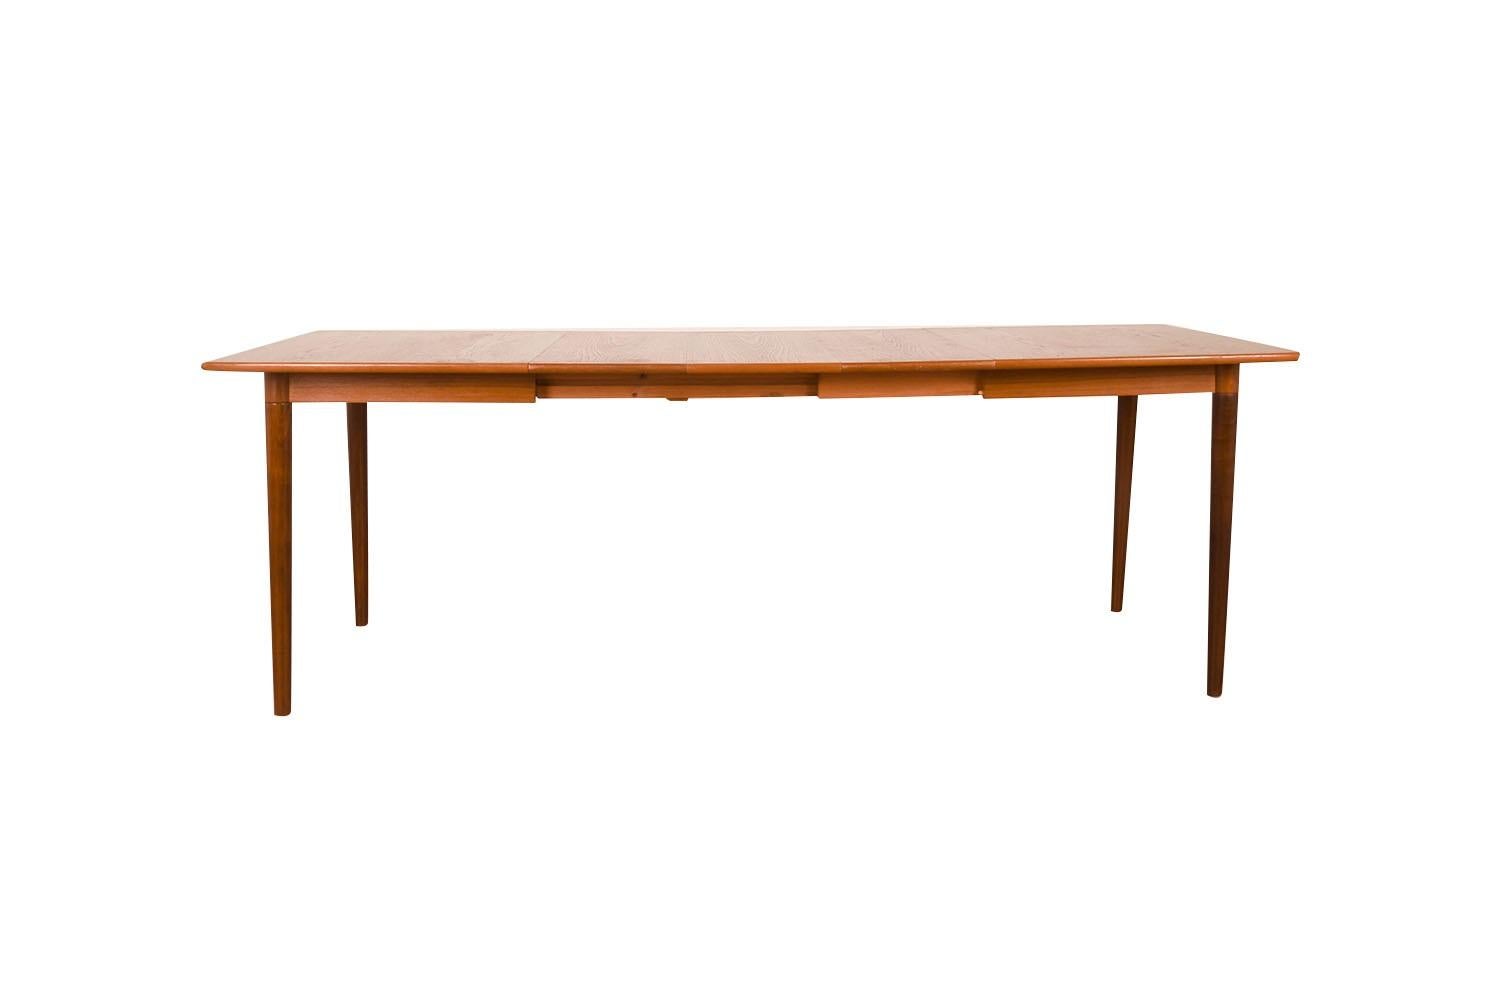 Beautiful large teak Mid-Century Modern expandable Dining Table with rounded corners designed by Alf Aarseth and manufactured by Gustav Bahus in Norway in the 1960s. Features richly grained, gleaming teak and smooth, clean lines characteristic of